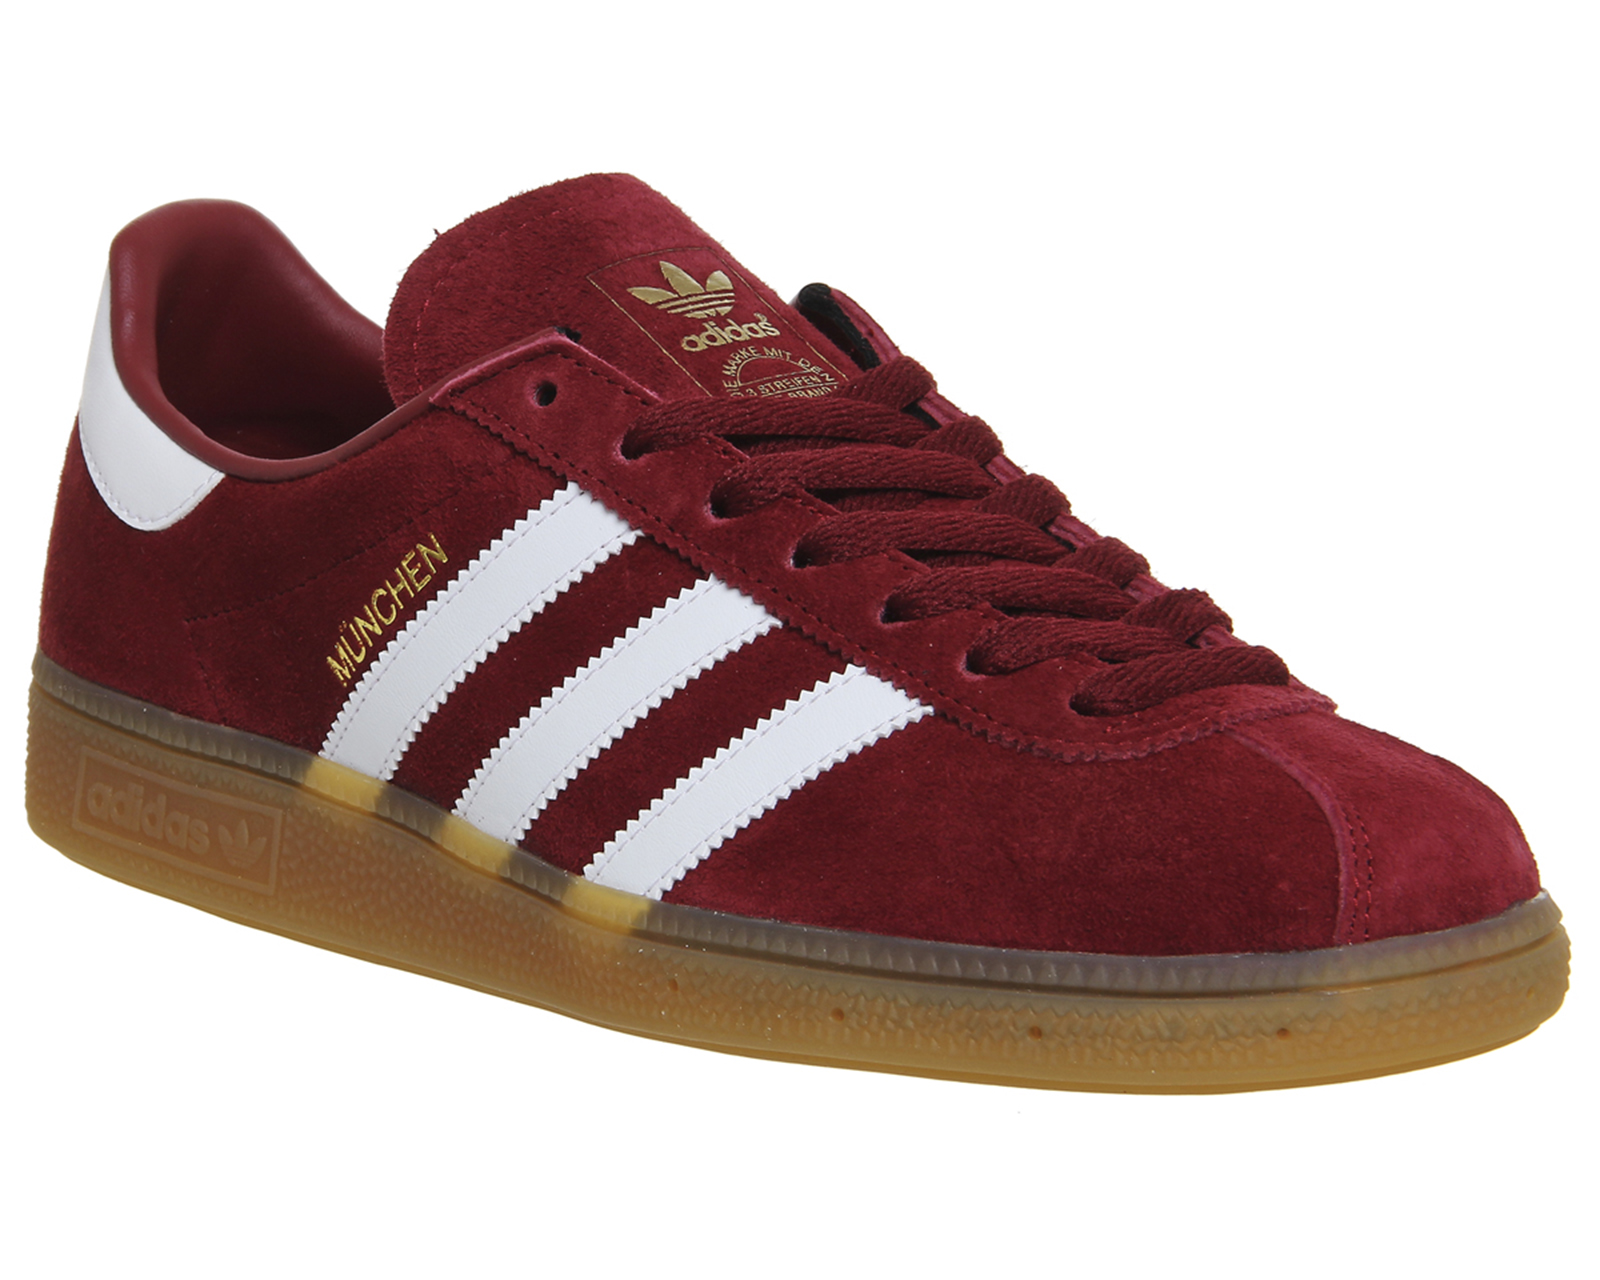 adidas munchen trainers size 9